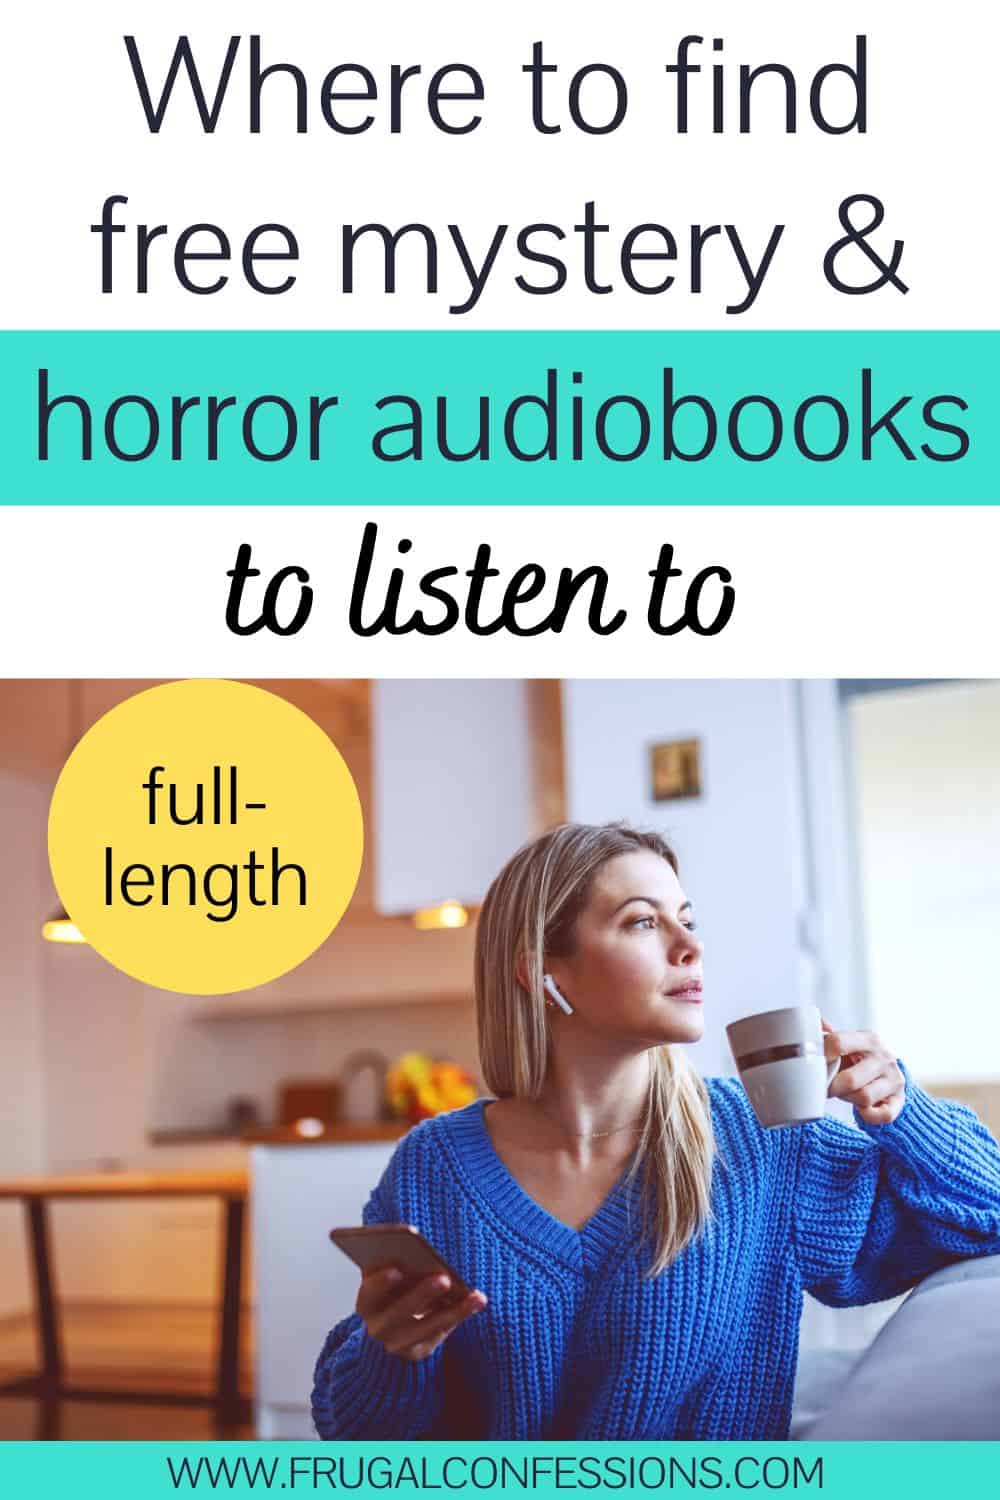 girl in blue sweater listening to horror audiobook on couch, text overlay "where to find free mystery and horror audiobooks"